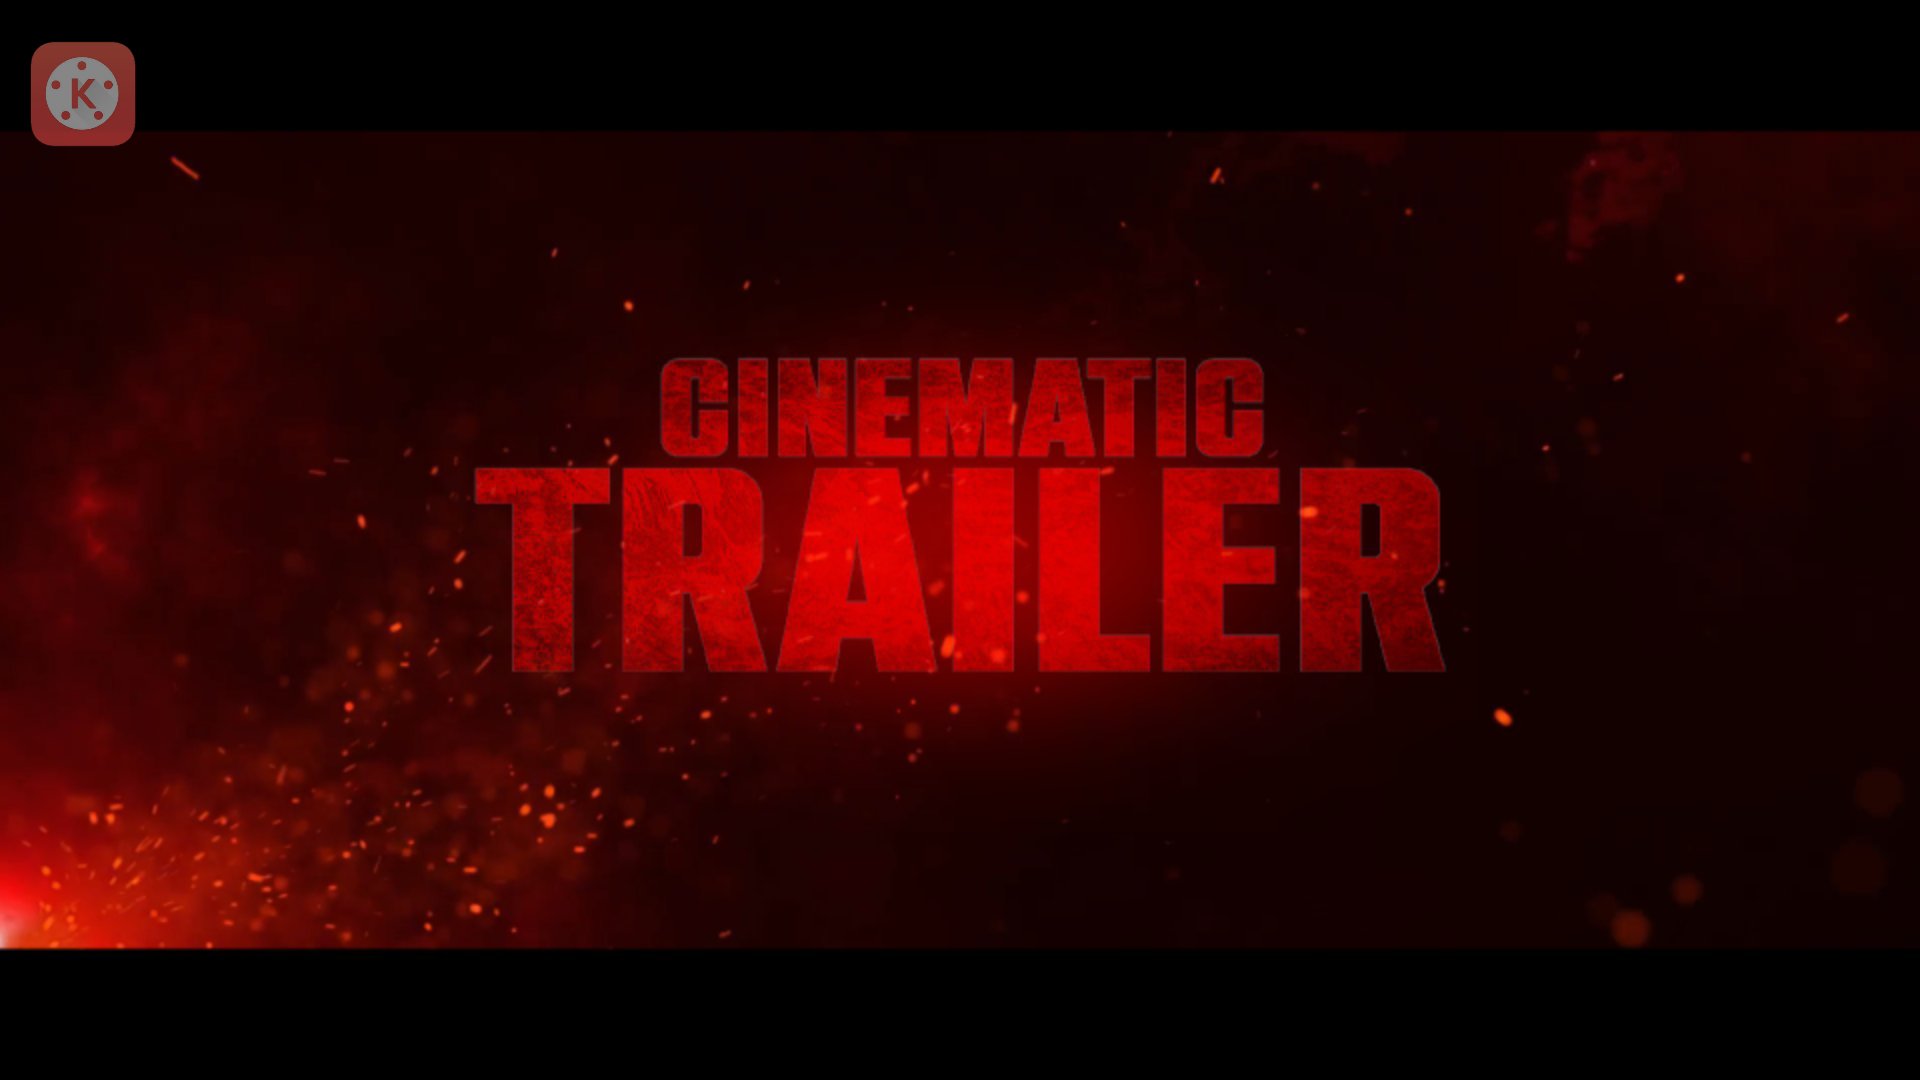 How To Make Title, Trailer & Text Animation Look Like a Cinematic Movie